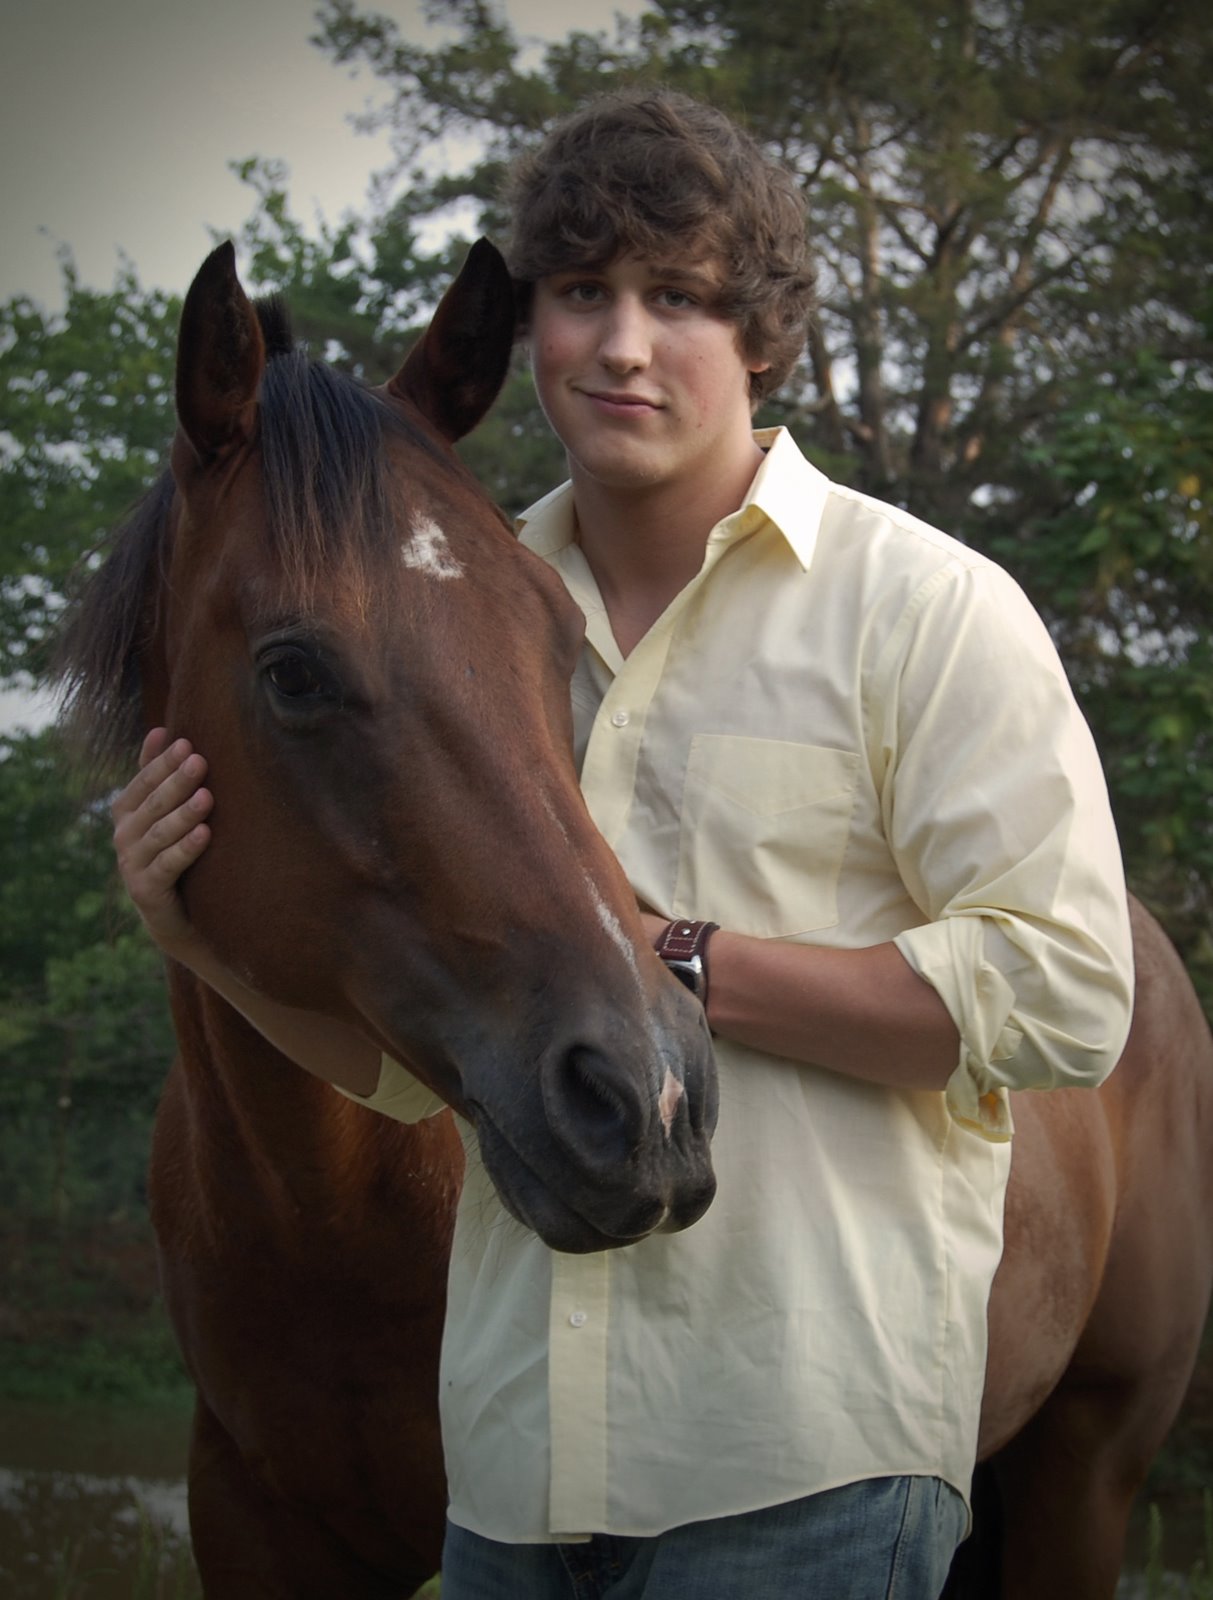 [ethan+and+horse+best.jpg]